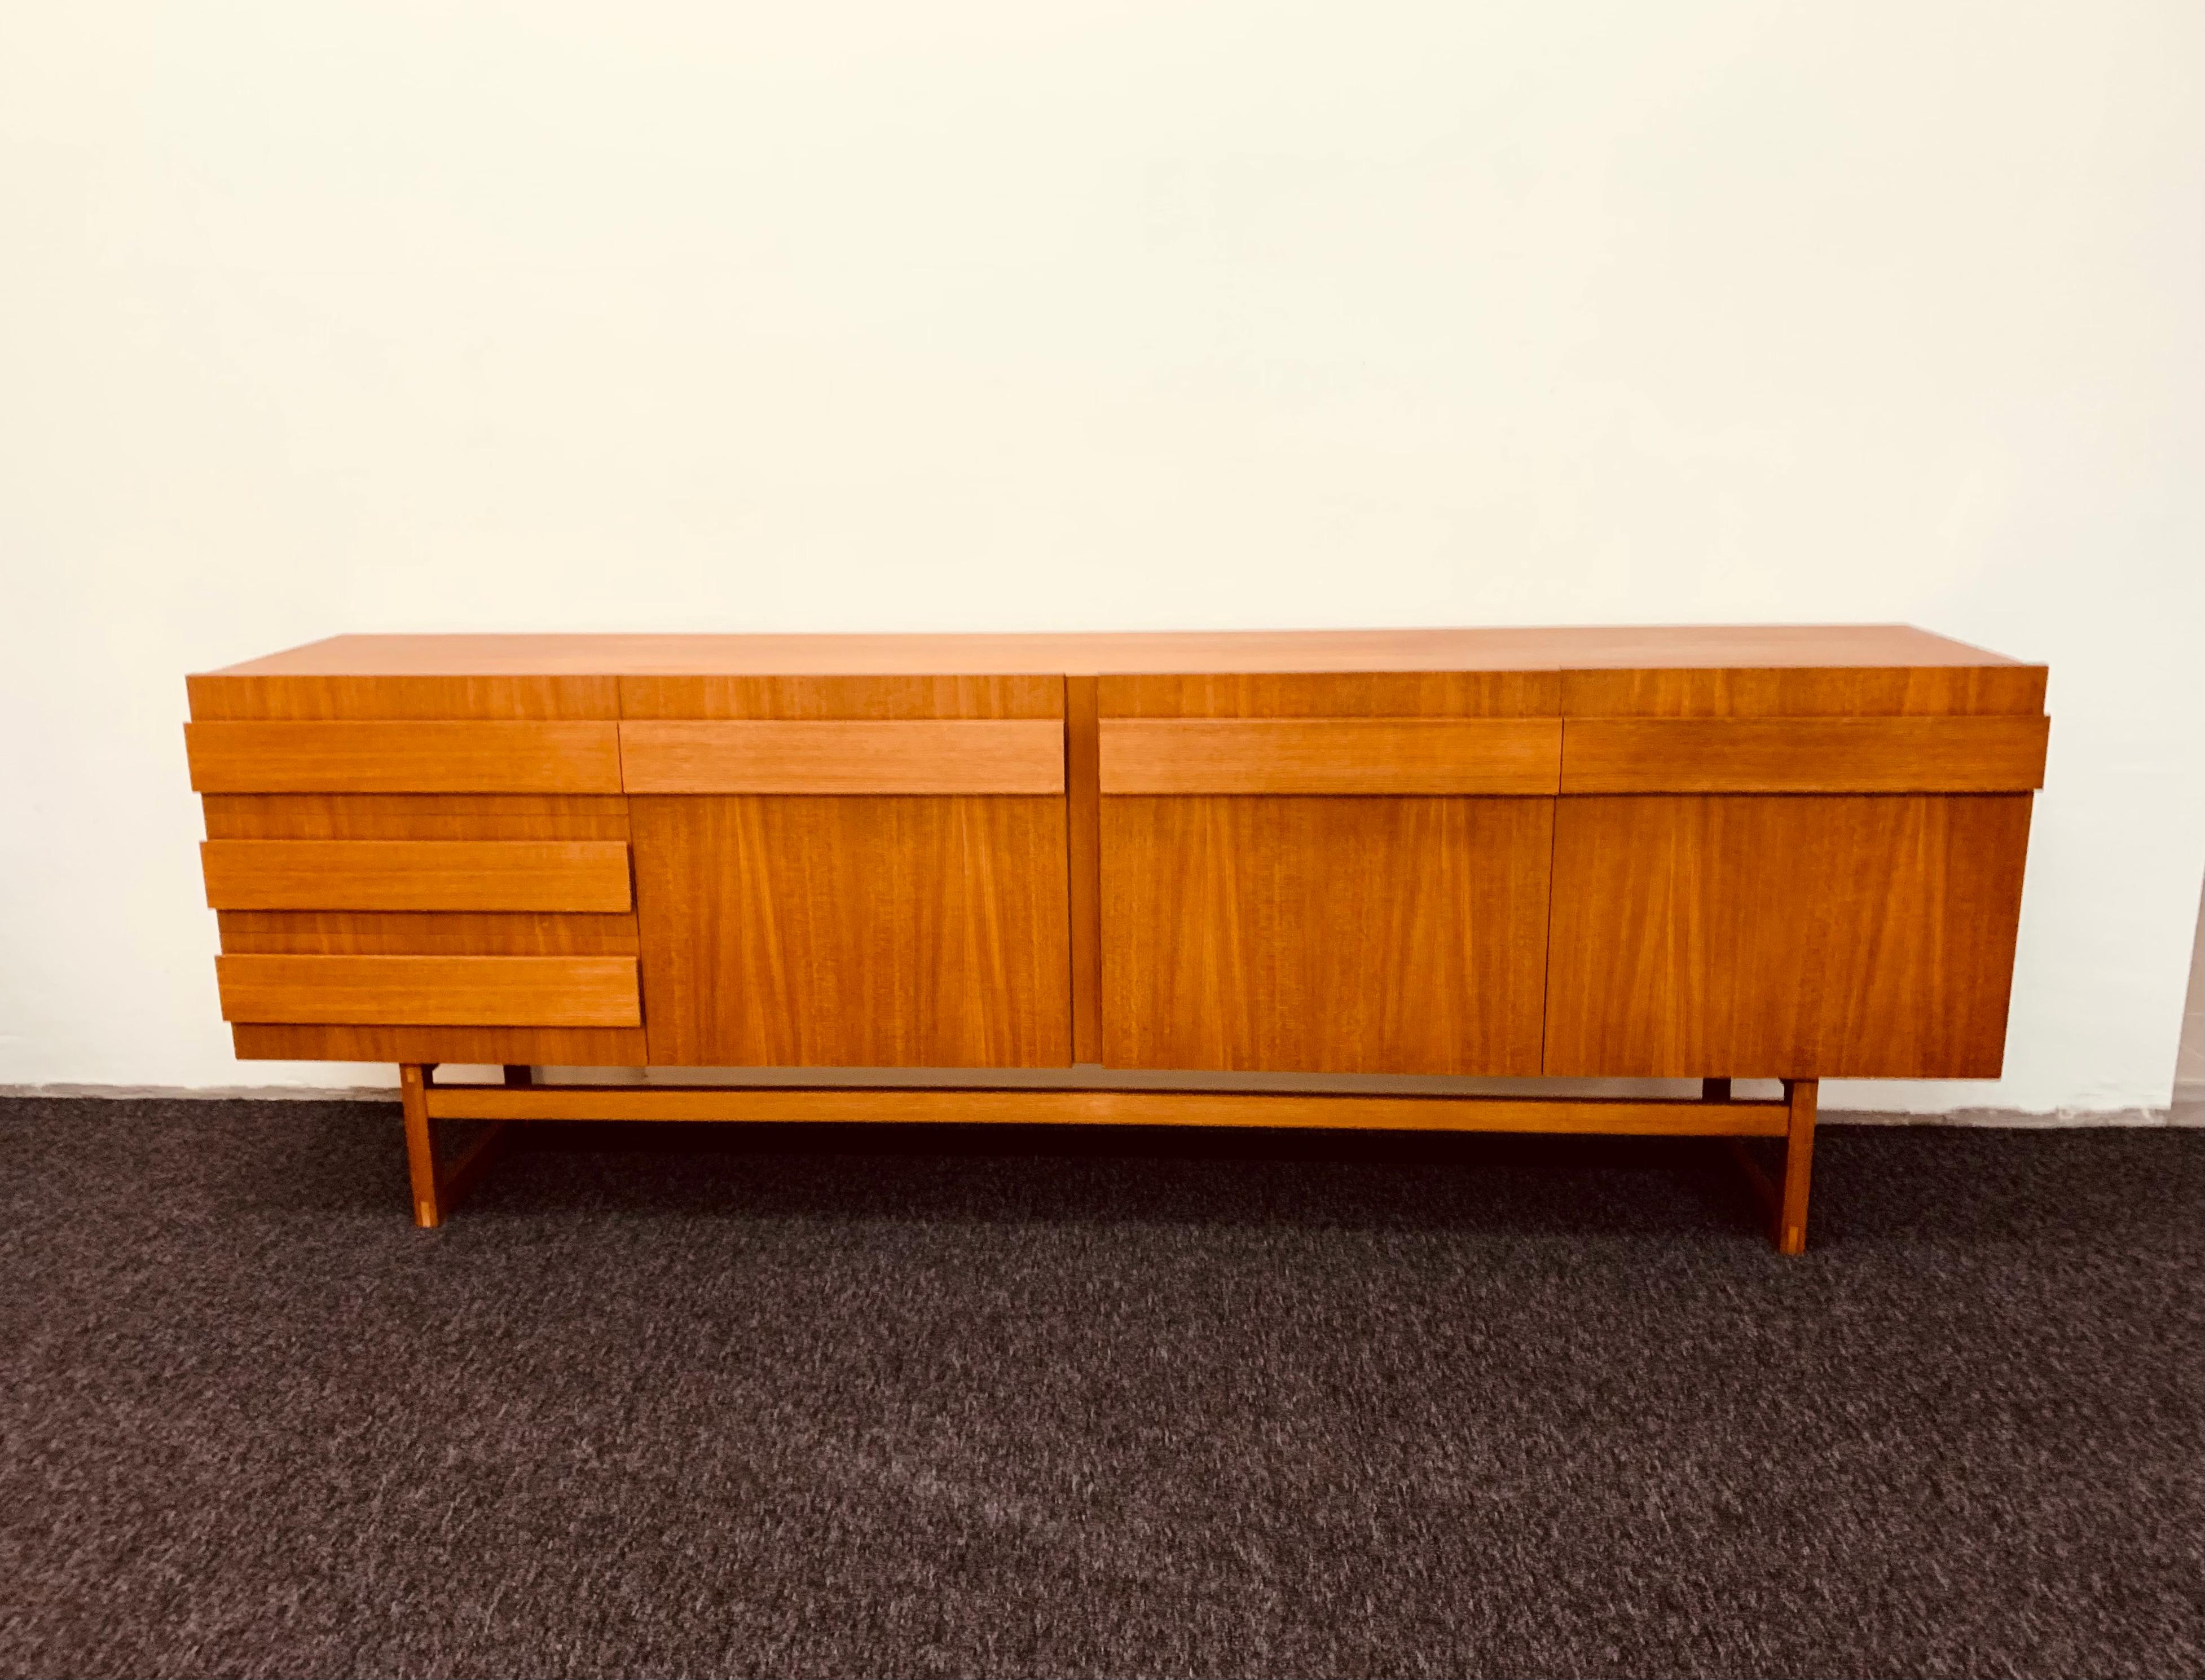 Exceptionally beautiful Danish teak sideboard from the 1960s.
Very high quality workmanship and elegant design.

Condition:

Very good vintage condition with slight signs of age-related wear.
The surface has been lovingly reworked.
Minor signs of